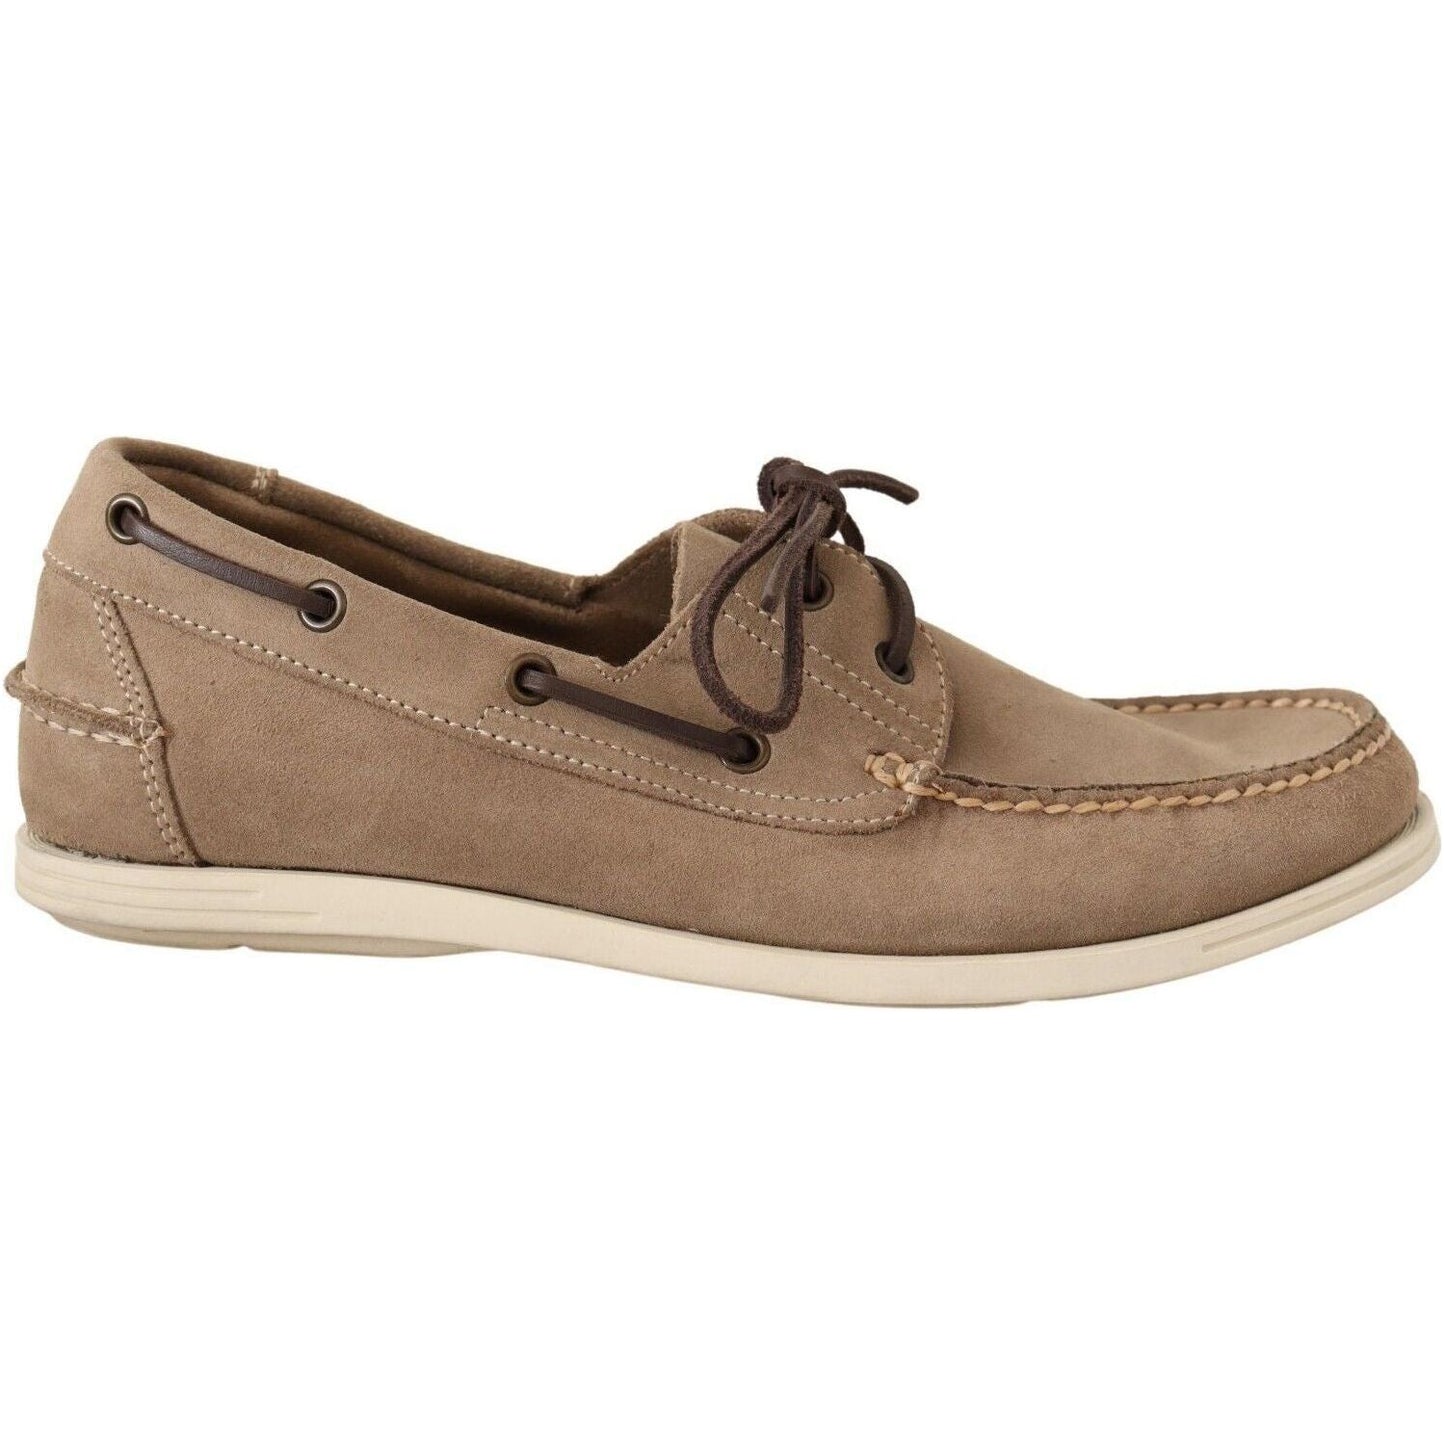 Pollini Elegant Beige Suede Moccasins for the Discerning Gentleman MAN LOAFERS beige-suede-low-top-mocassin-loafers-casual-men-shoes s-l1600-180-e6e855f0-6d7.jpg